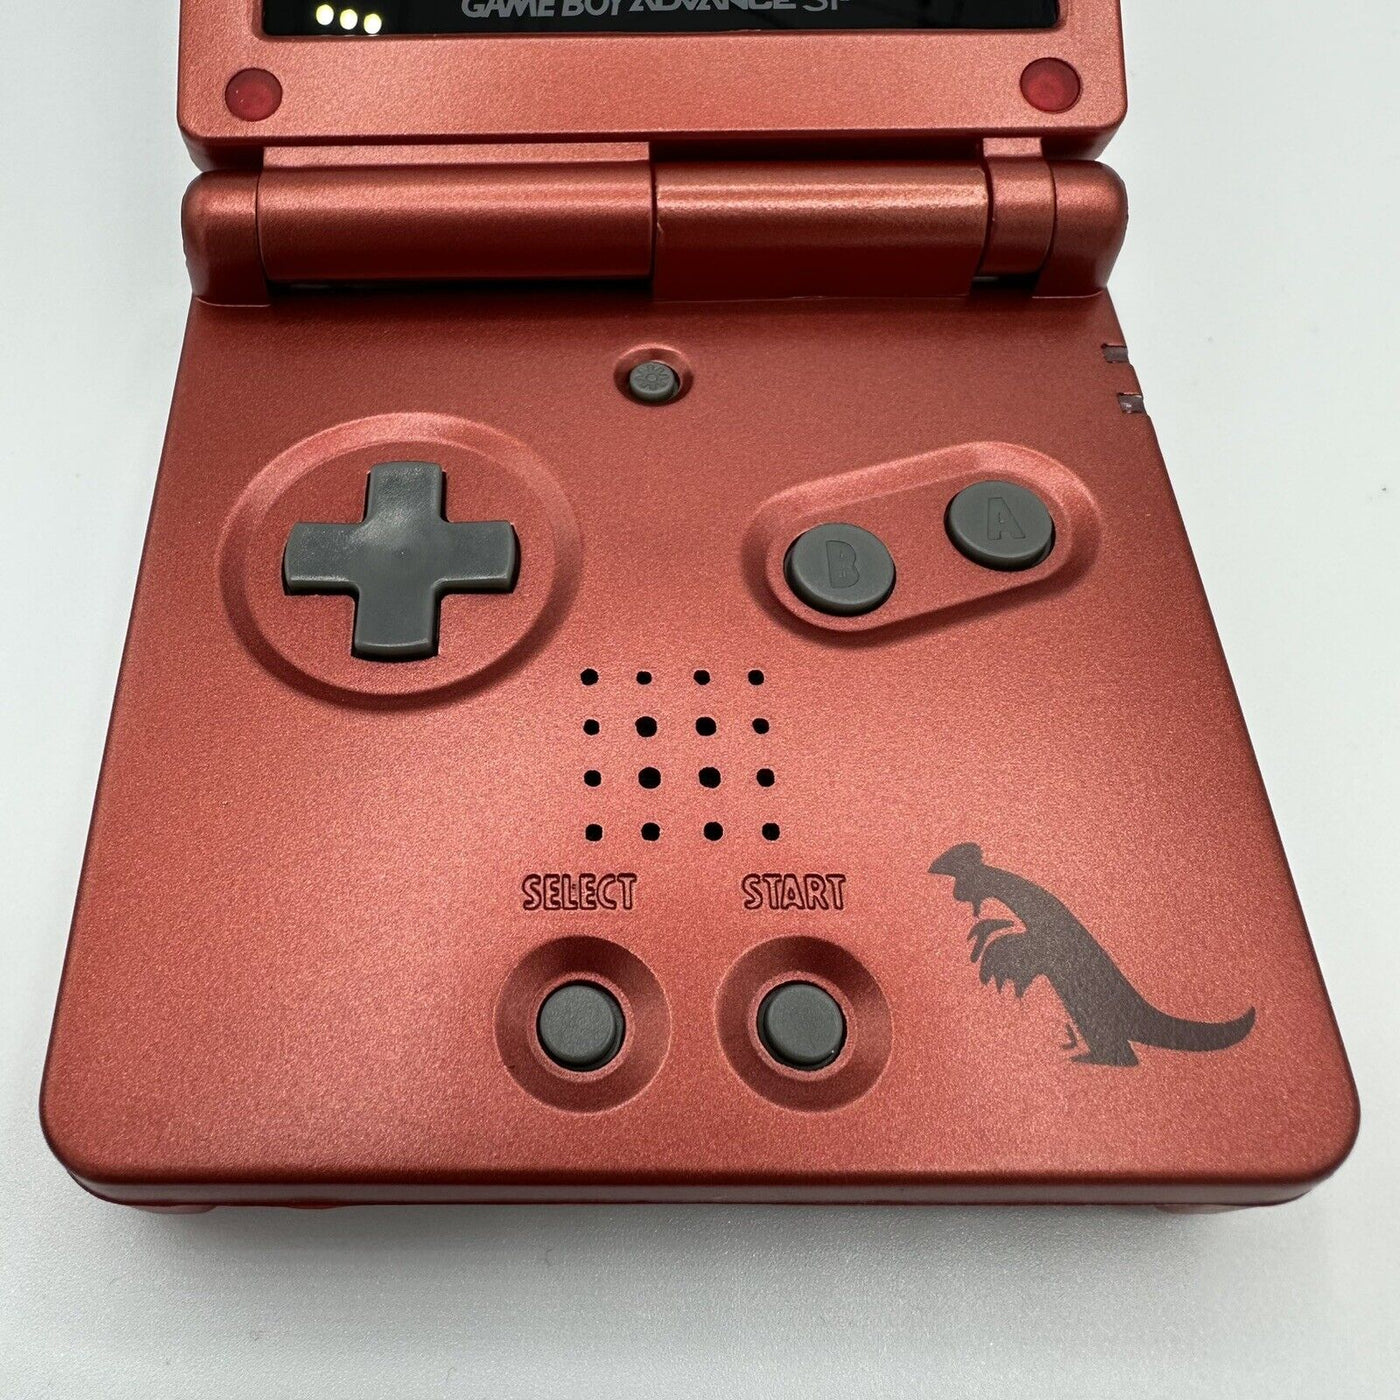 Game Boy Advance SP Console - Groudon Ruby Edition